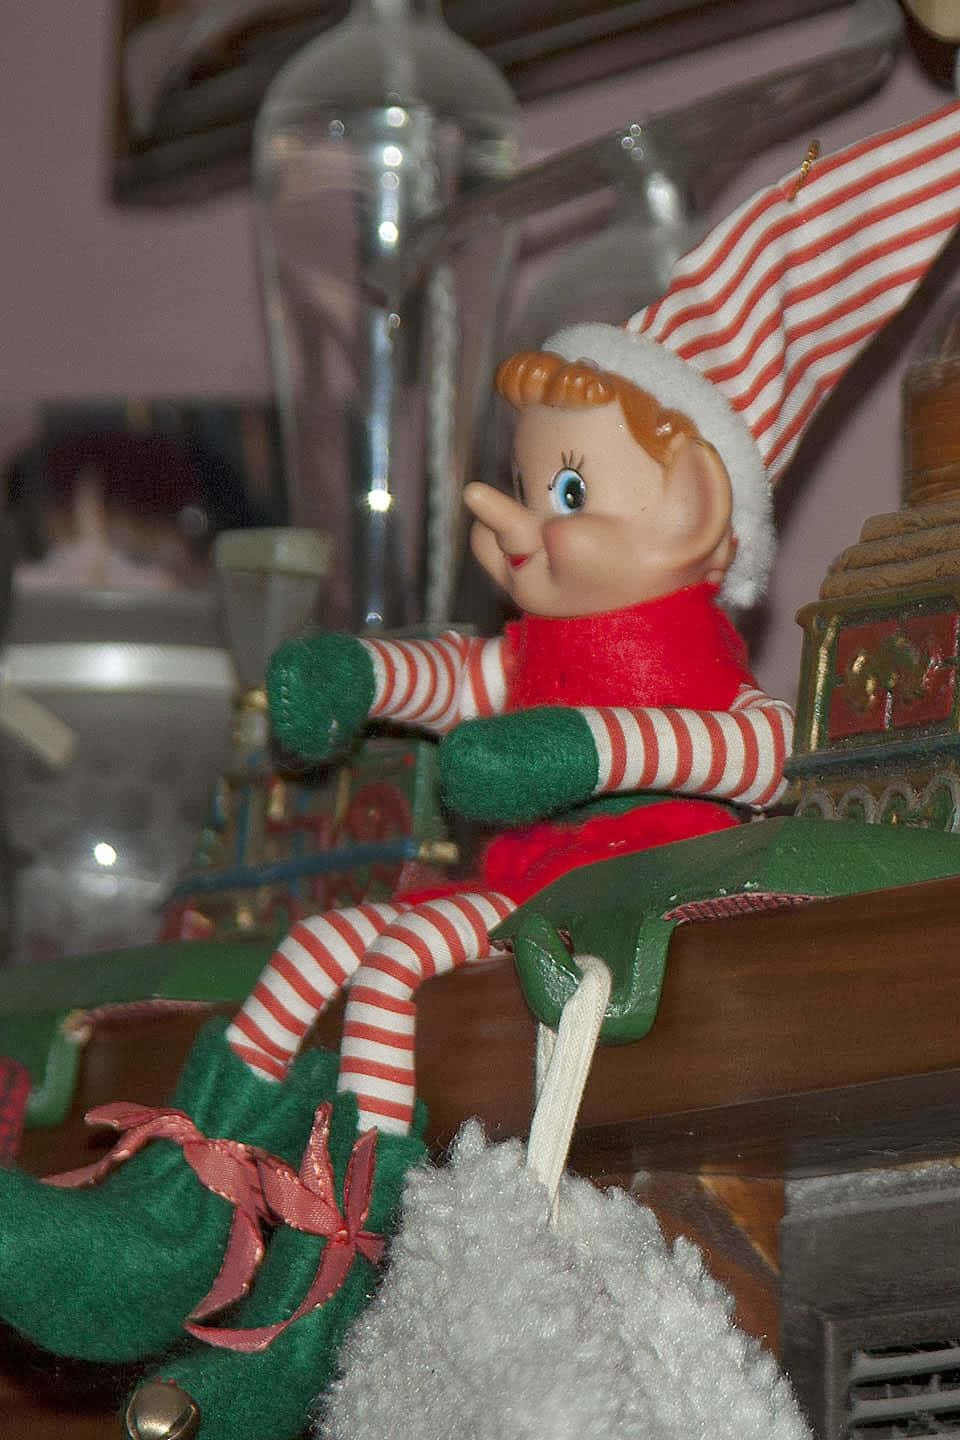 Add a sprinkle of Christmas magic to your home this season with an Elf On The Shelf.